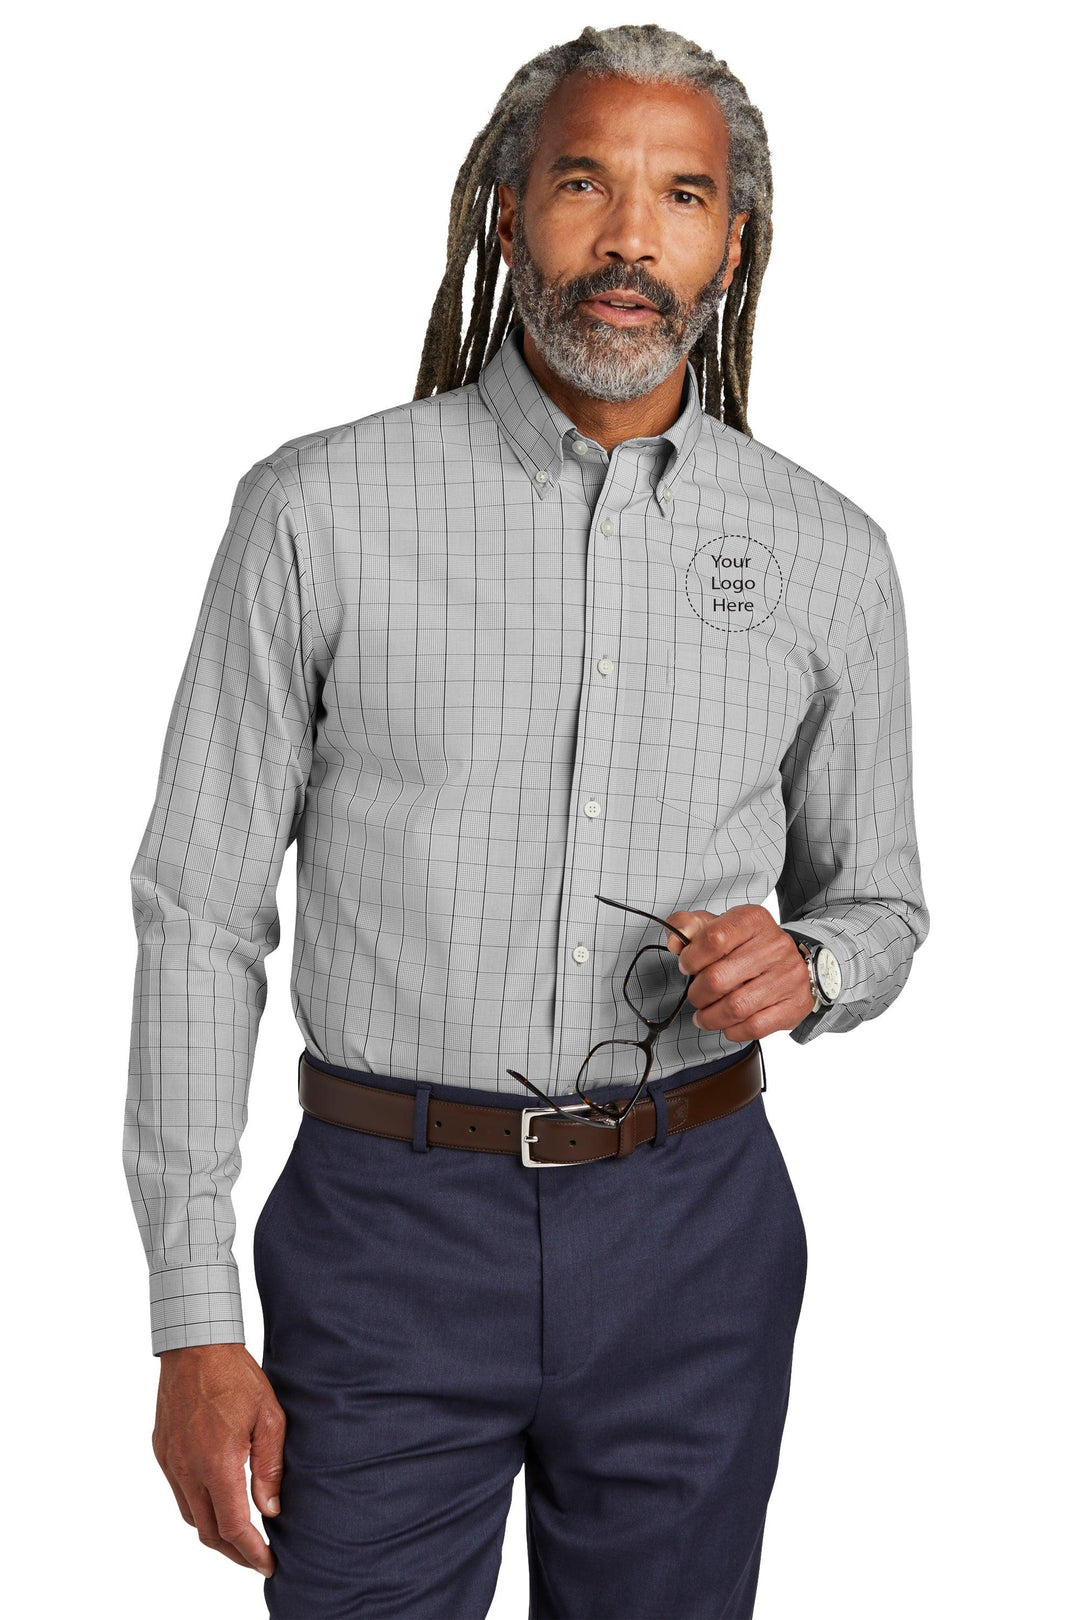 Keller Williams NEW KW-BB18008 Brooks Brothers® Wrinkle-Free Stretch Patterned Shirt 